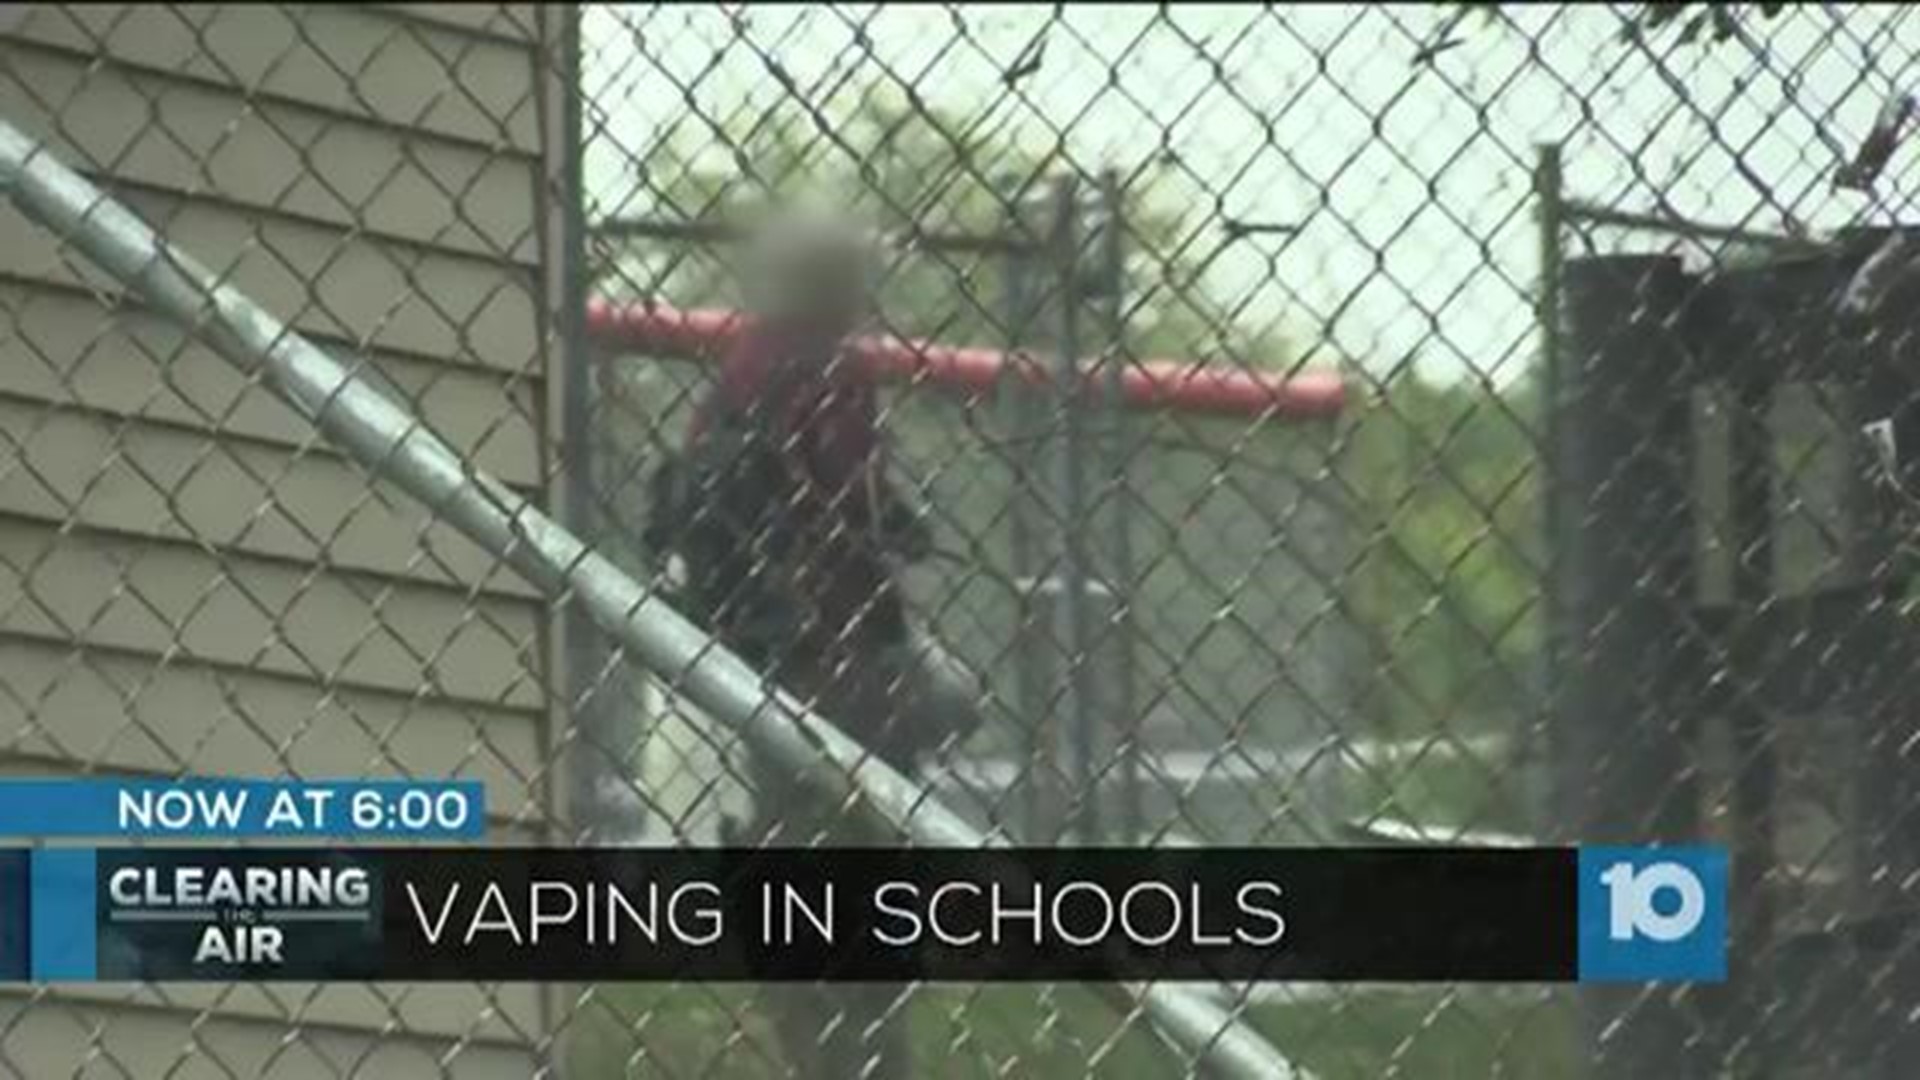 Vaping has increases 700% in Ohio schools since 2016